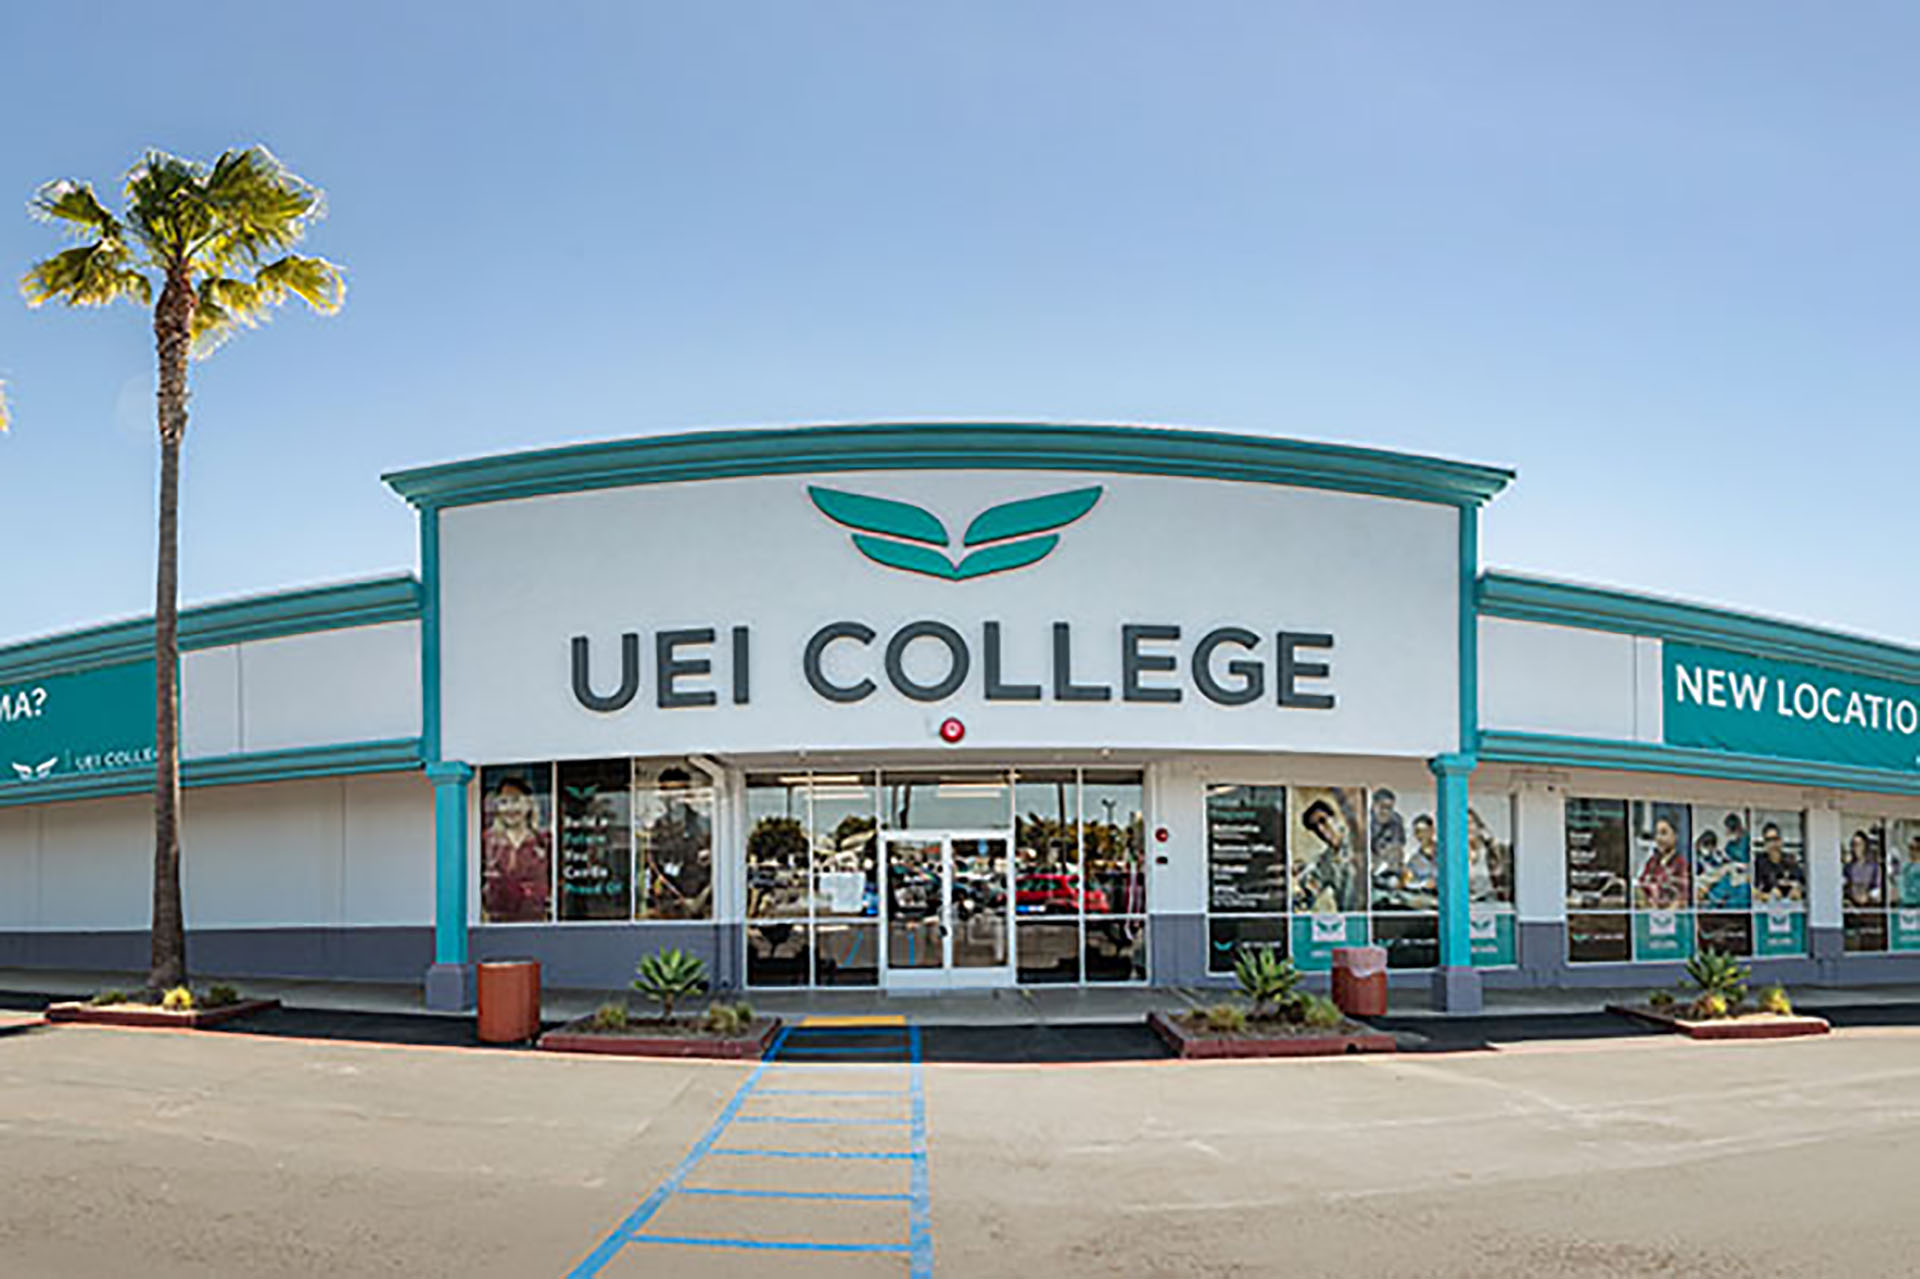 What degrees does UEI College offer?